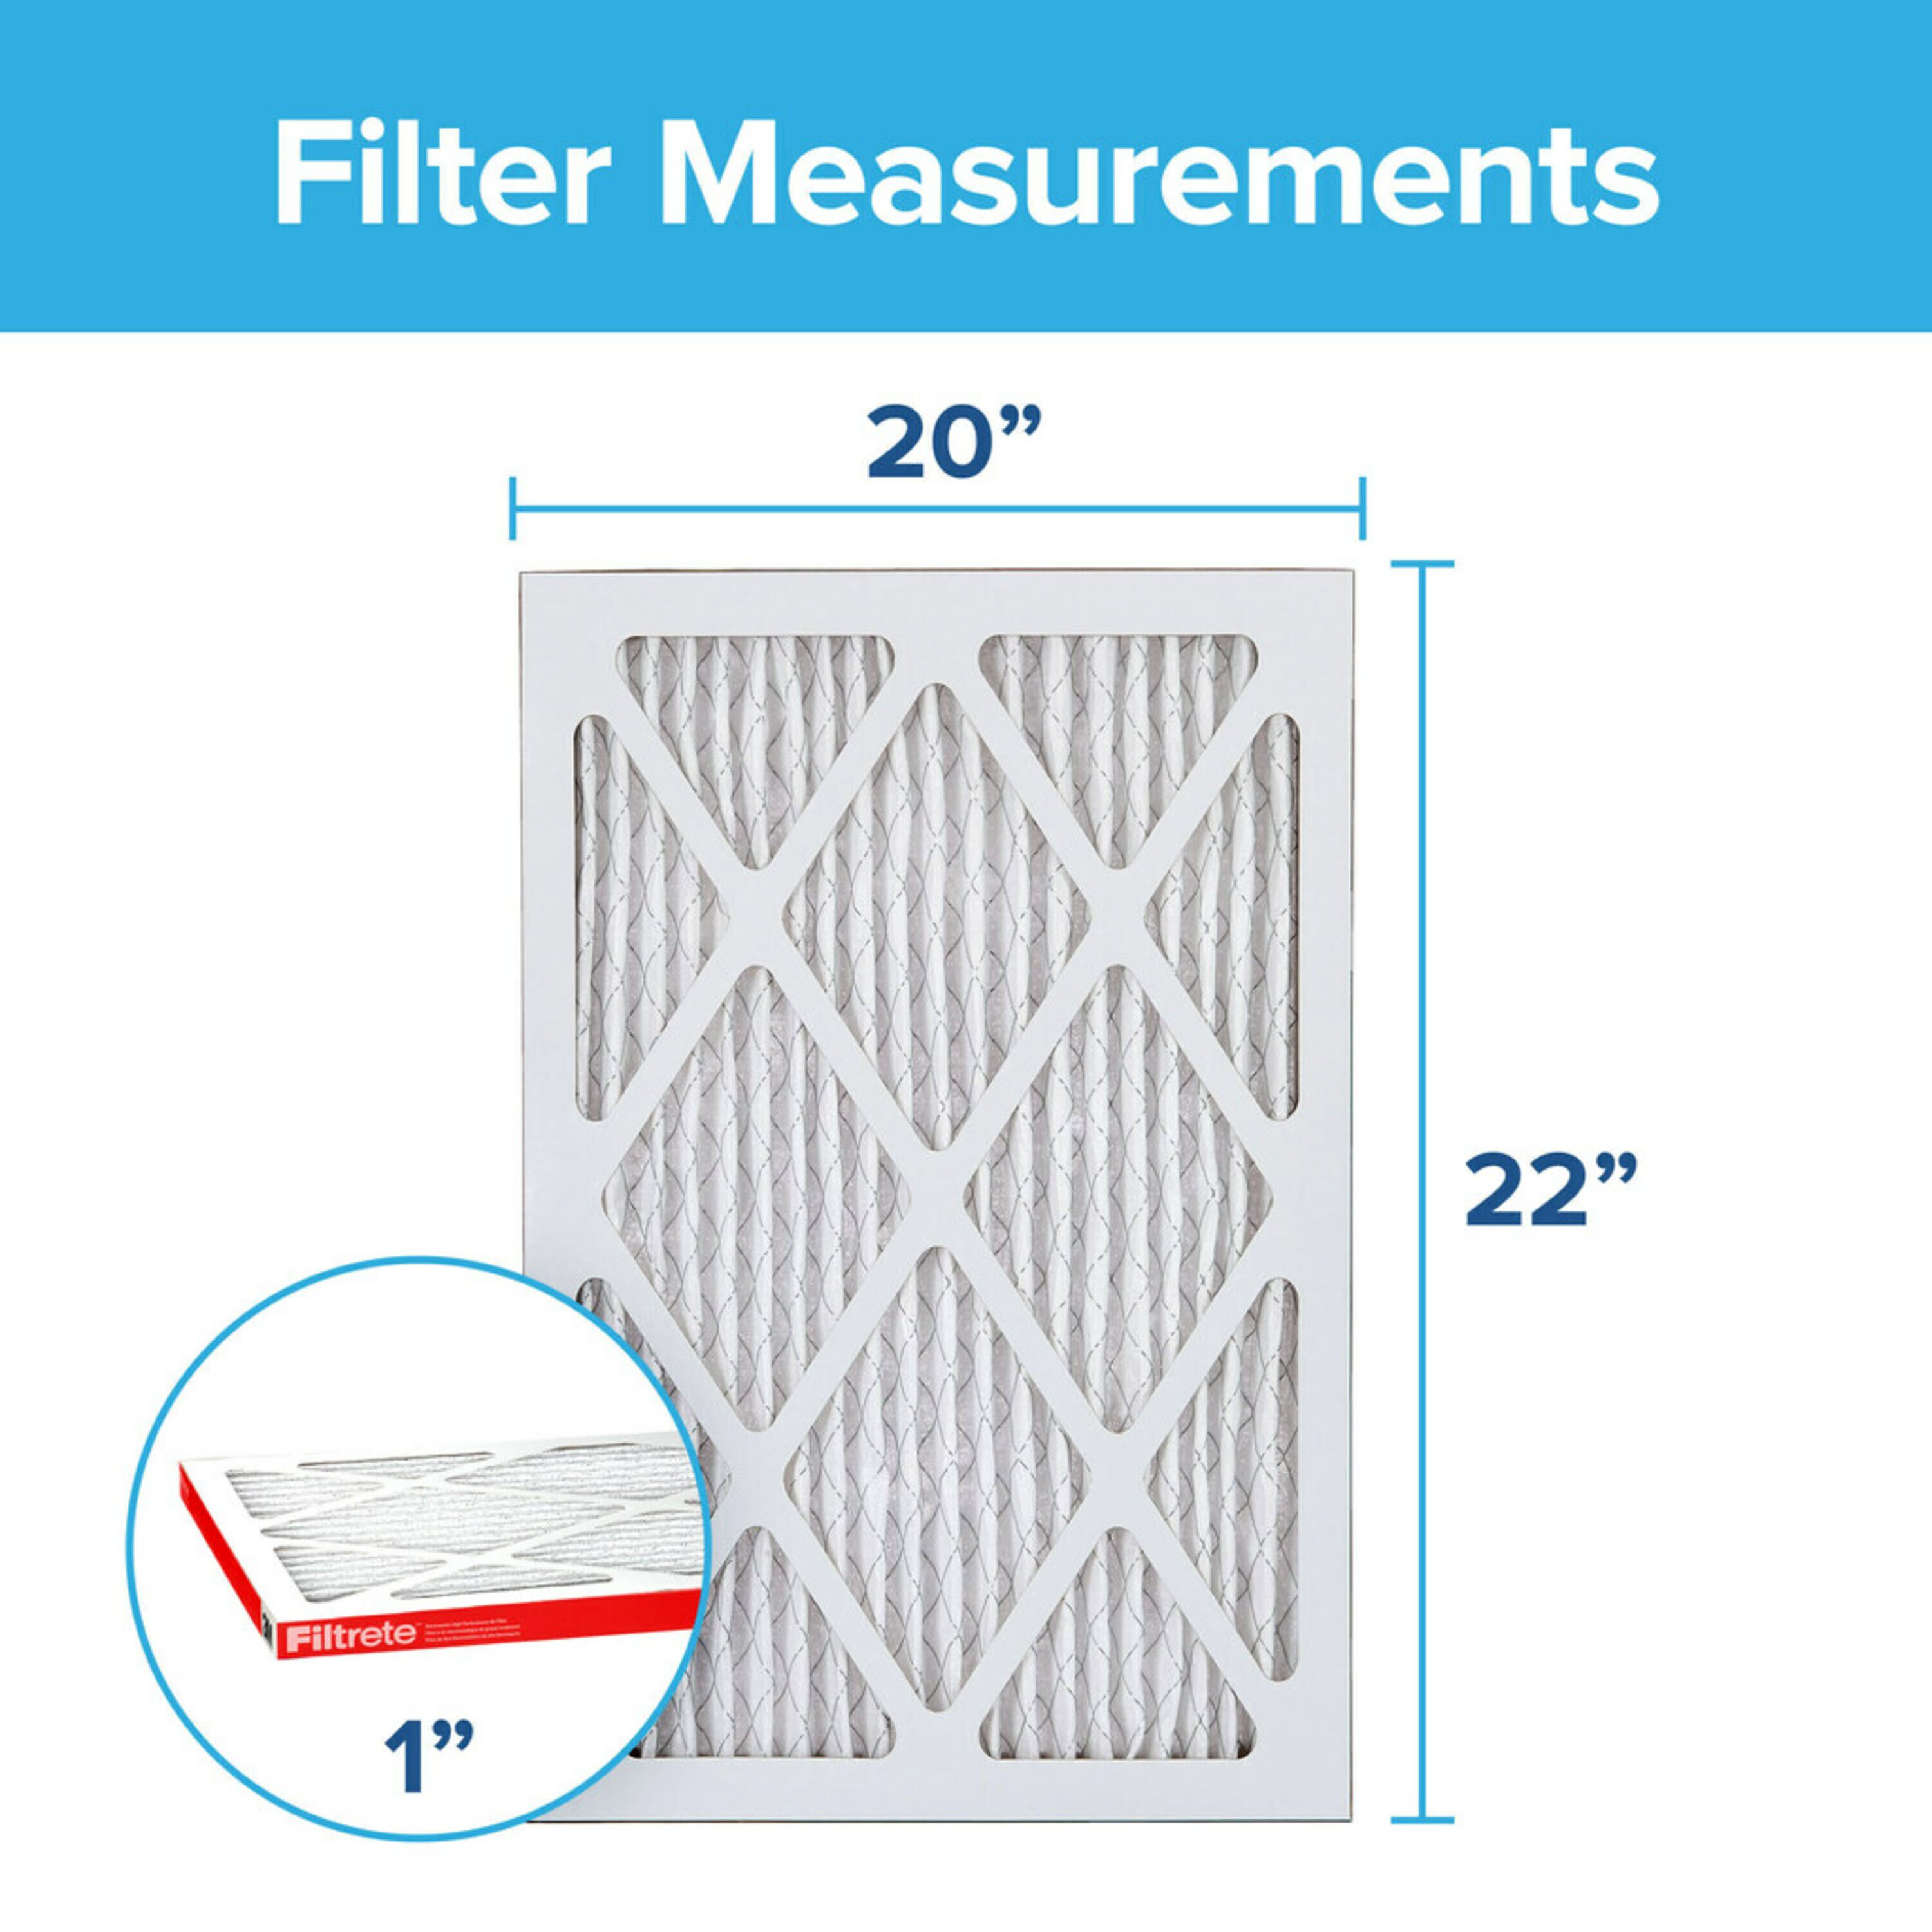 3M  Filtrete Non Electrostatic Basic Pleated Air Filter 20 x 30 x 1 FBA22DC-6